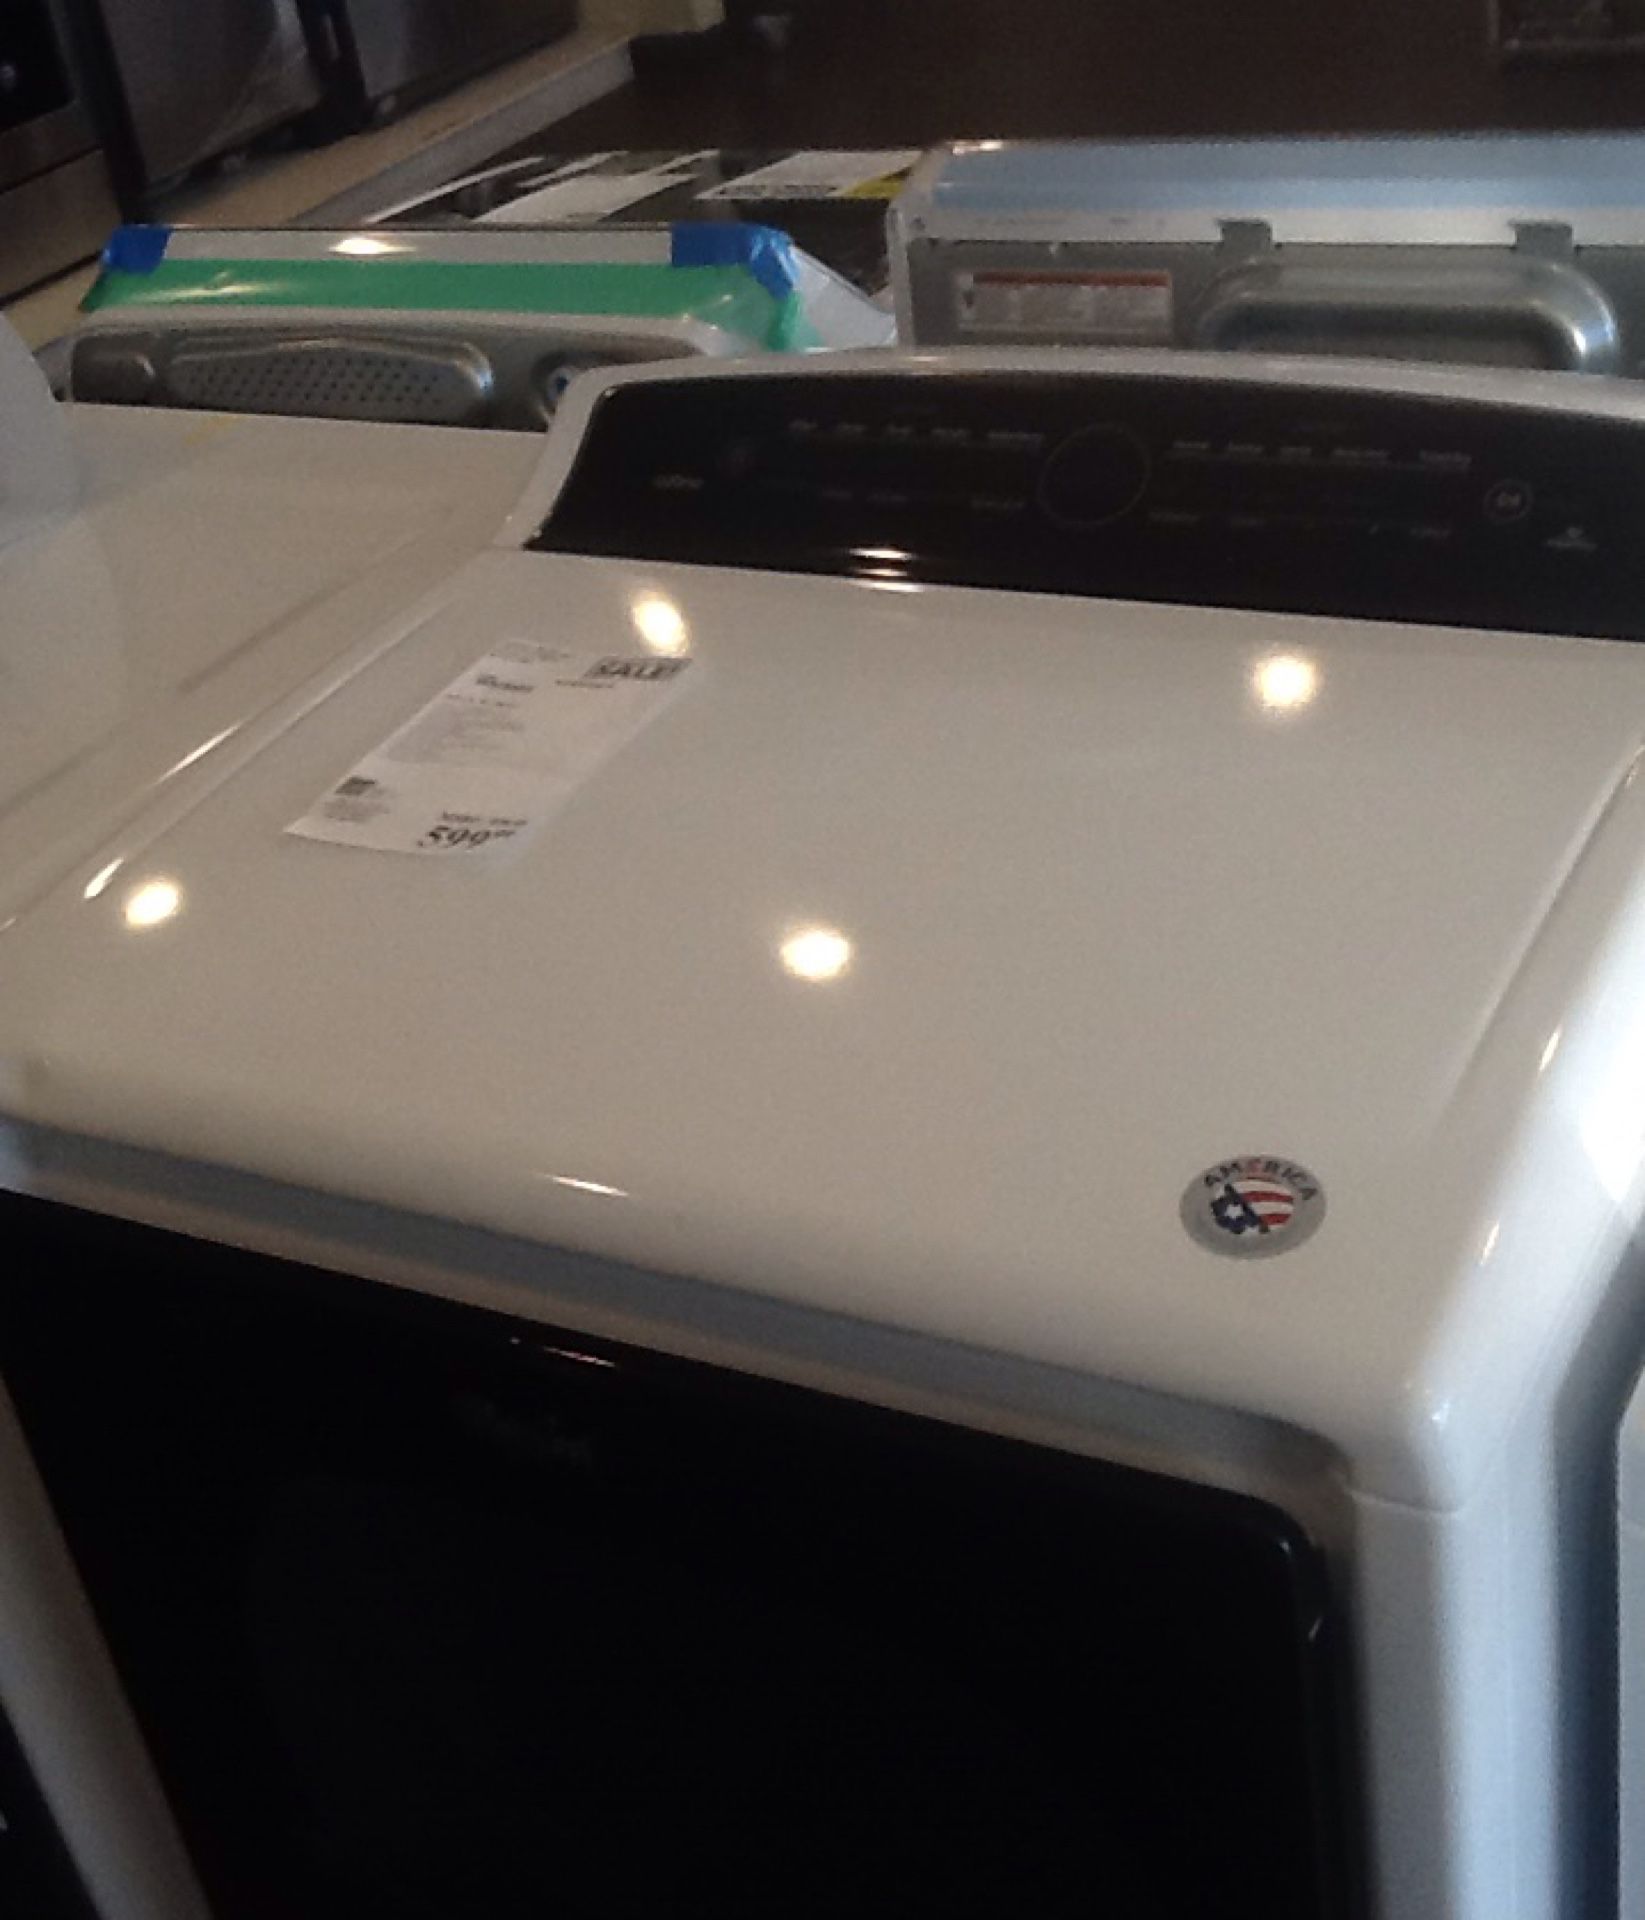 New whirlpool electric dryer WED8000DW